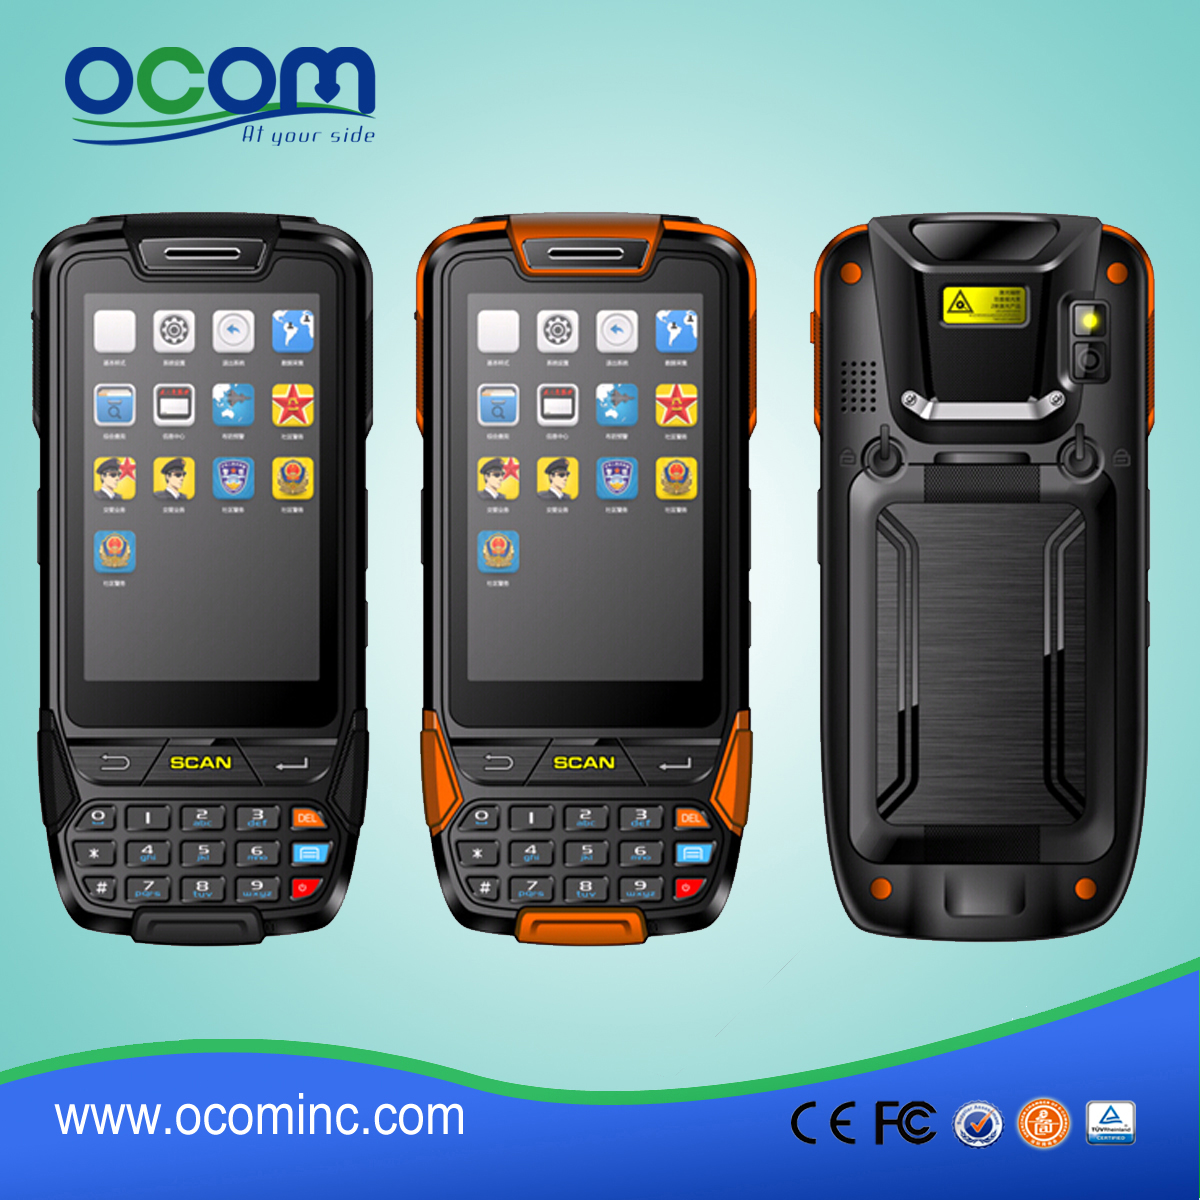 Android Data Collection PDA Made in China, Multi Funkcje Opcji OCBS-D8000